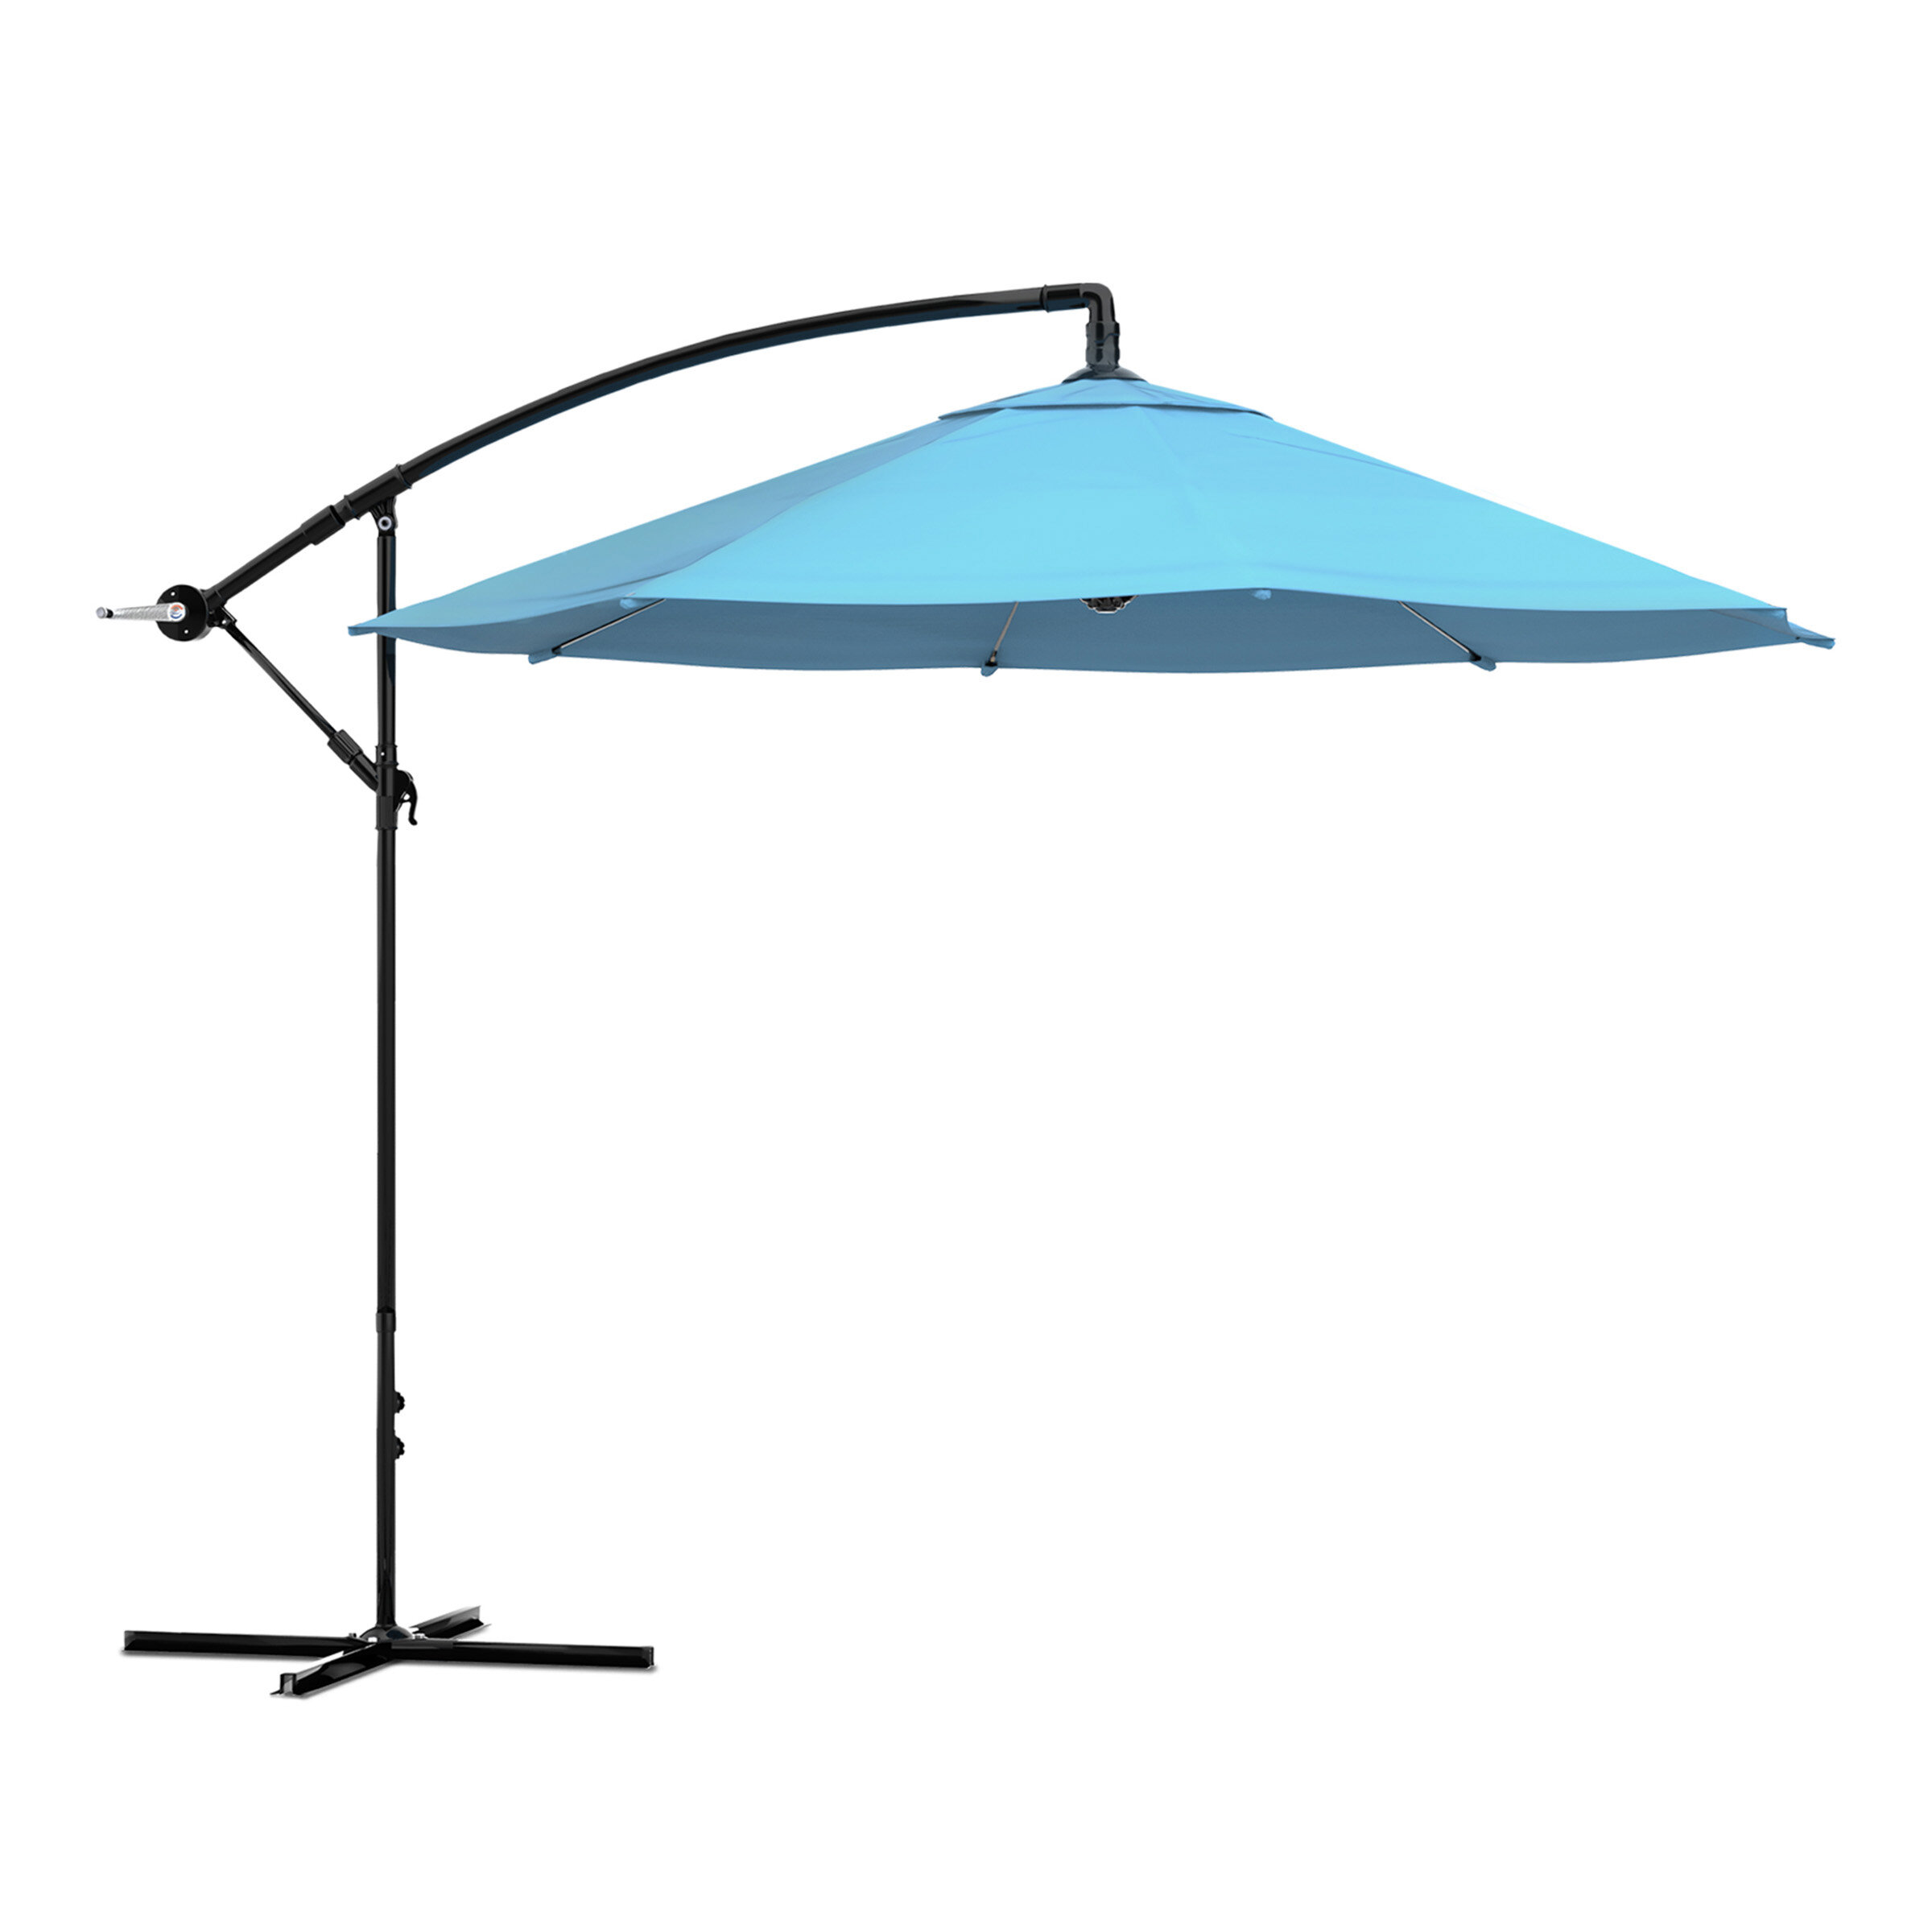 in different sizes Comfort Case for Parasol 